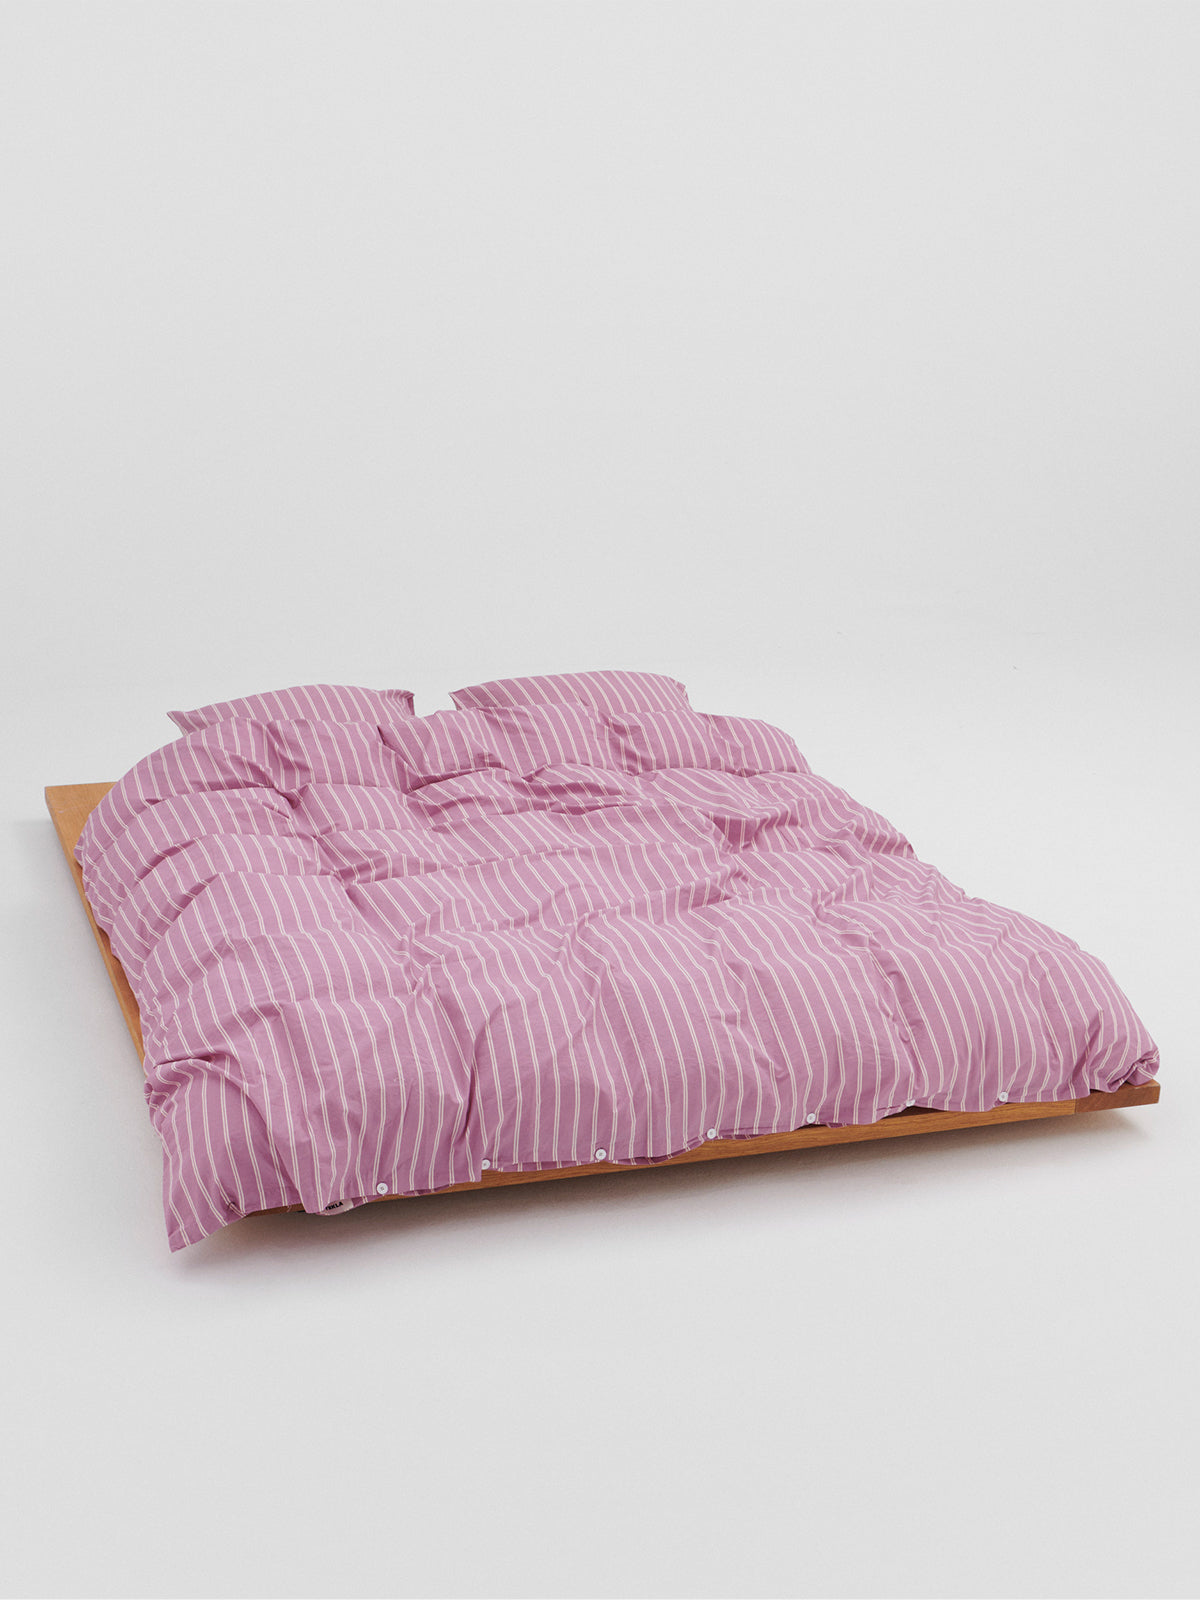 Tekla - Percale Duvet Cover in Mallow Pink Stripes